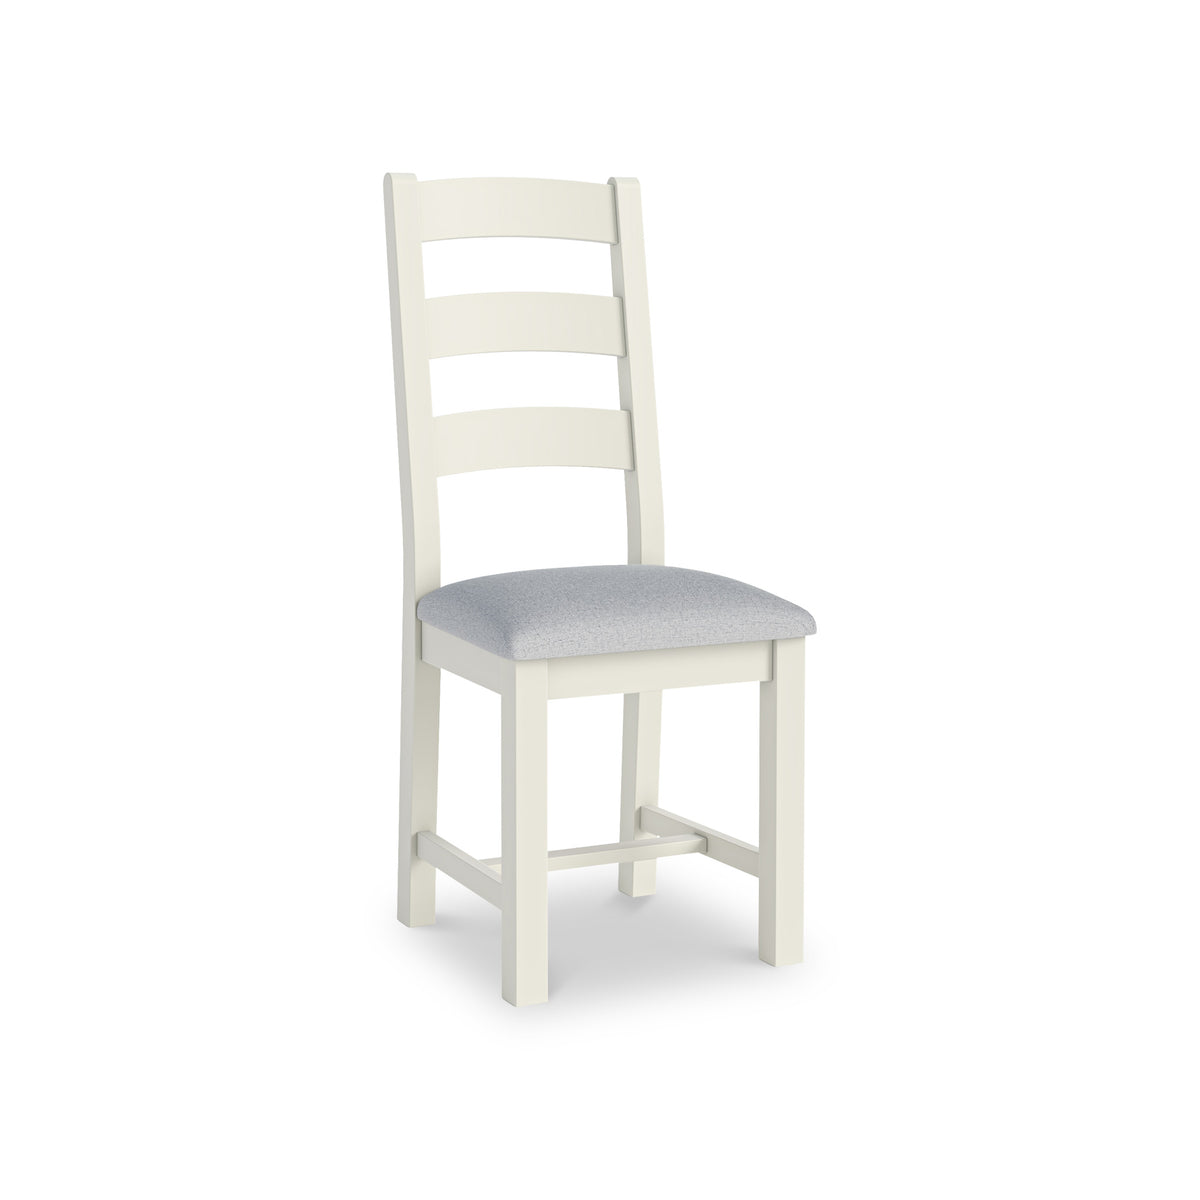 Bude Ivory Dining Chair with Fabric Seat from Roseland Furniture